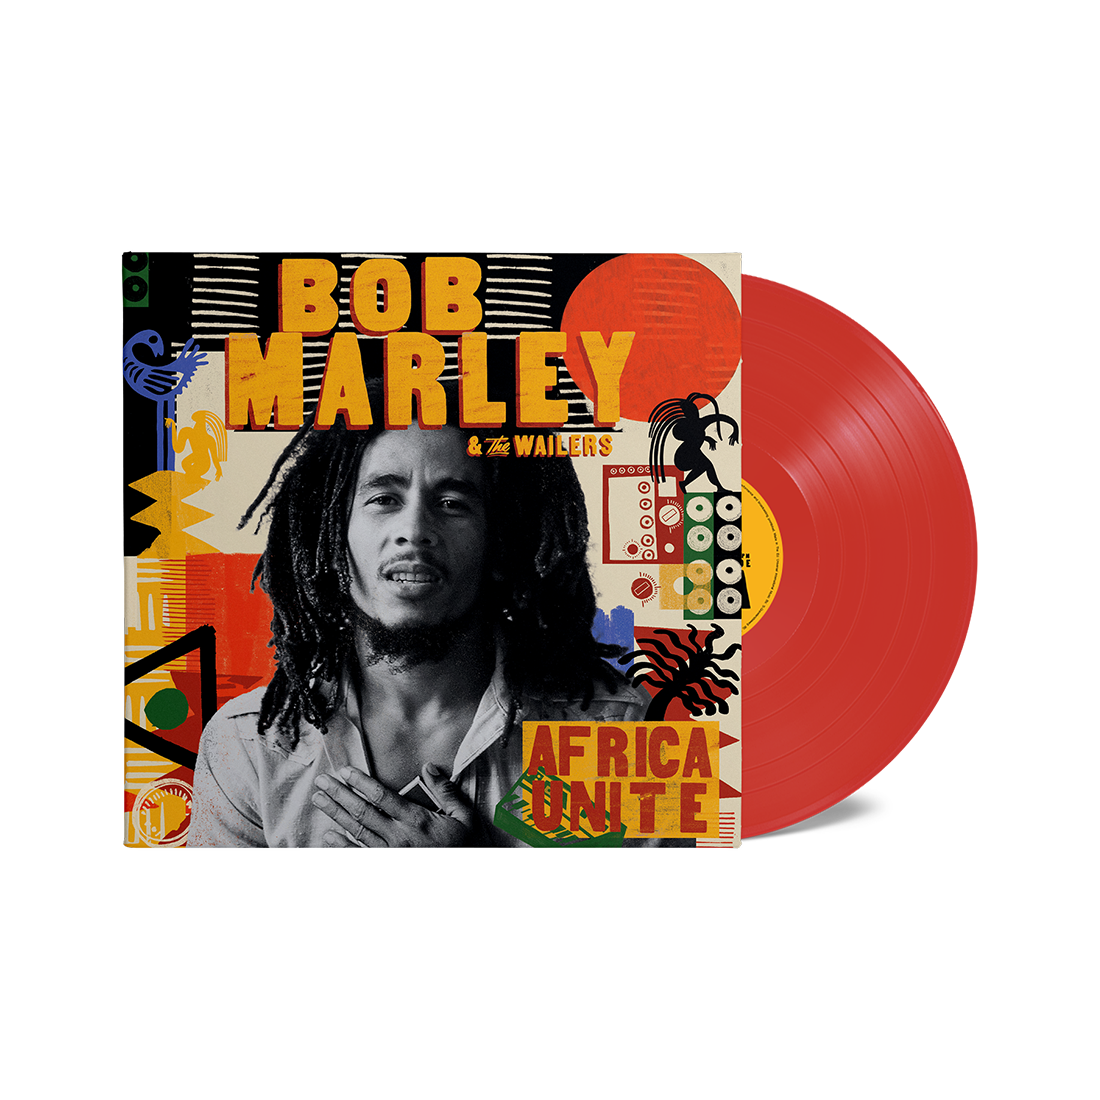 Bob Marley - Africa Unite: Limited Opaque Red Vinyl LP